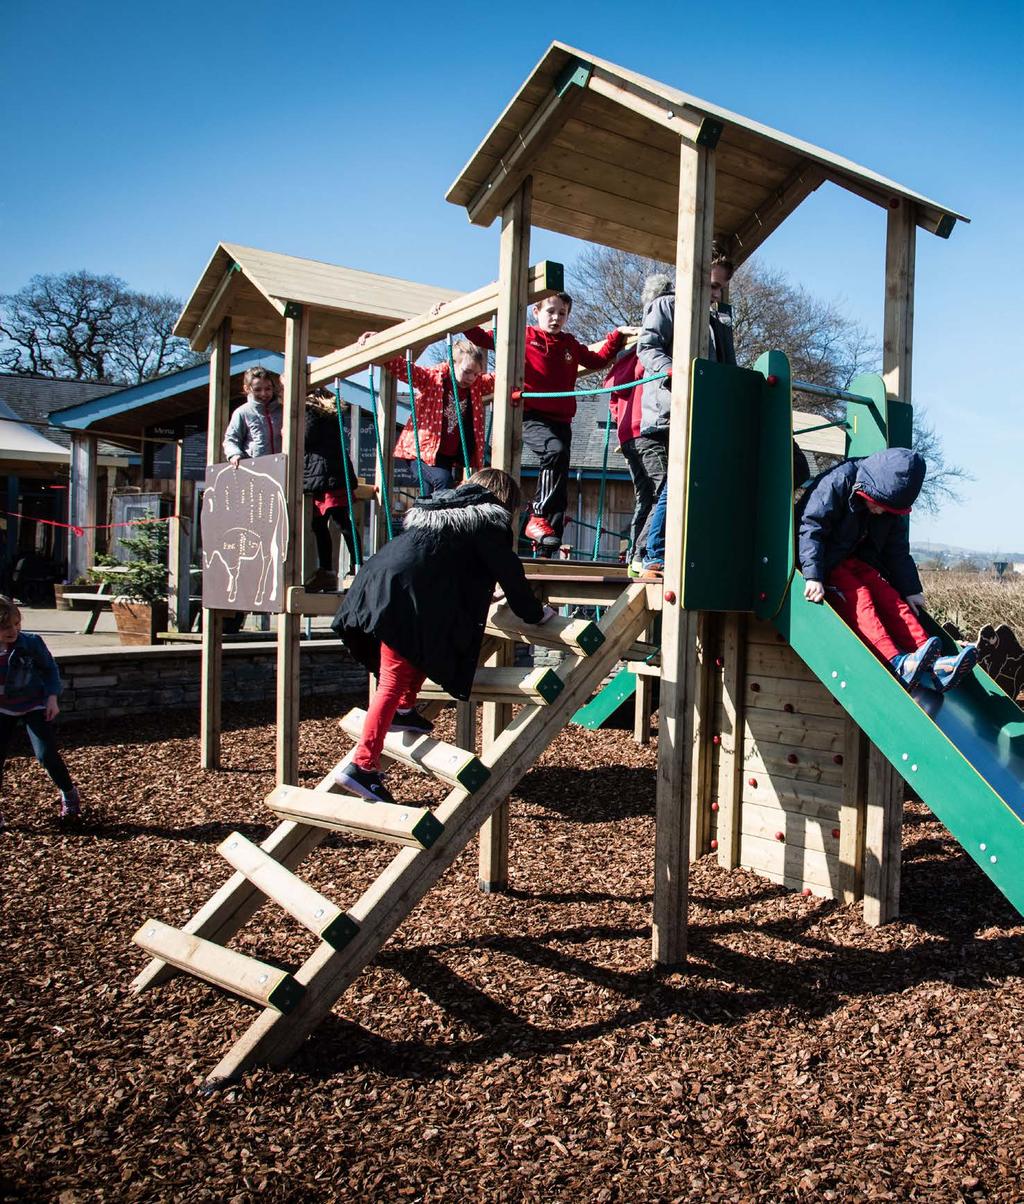 ABOUT CREATIVE PLAY Creative Play have been installing play areas for more than 25 years and we have built a huge amount of experience in delivering exciting, innovative outdoor play & recreational